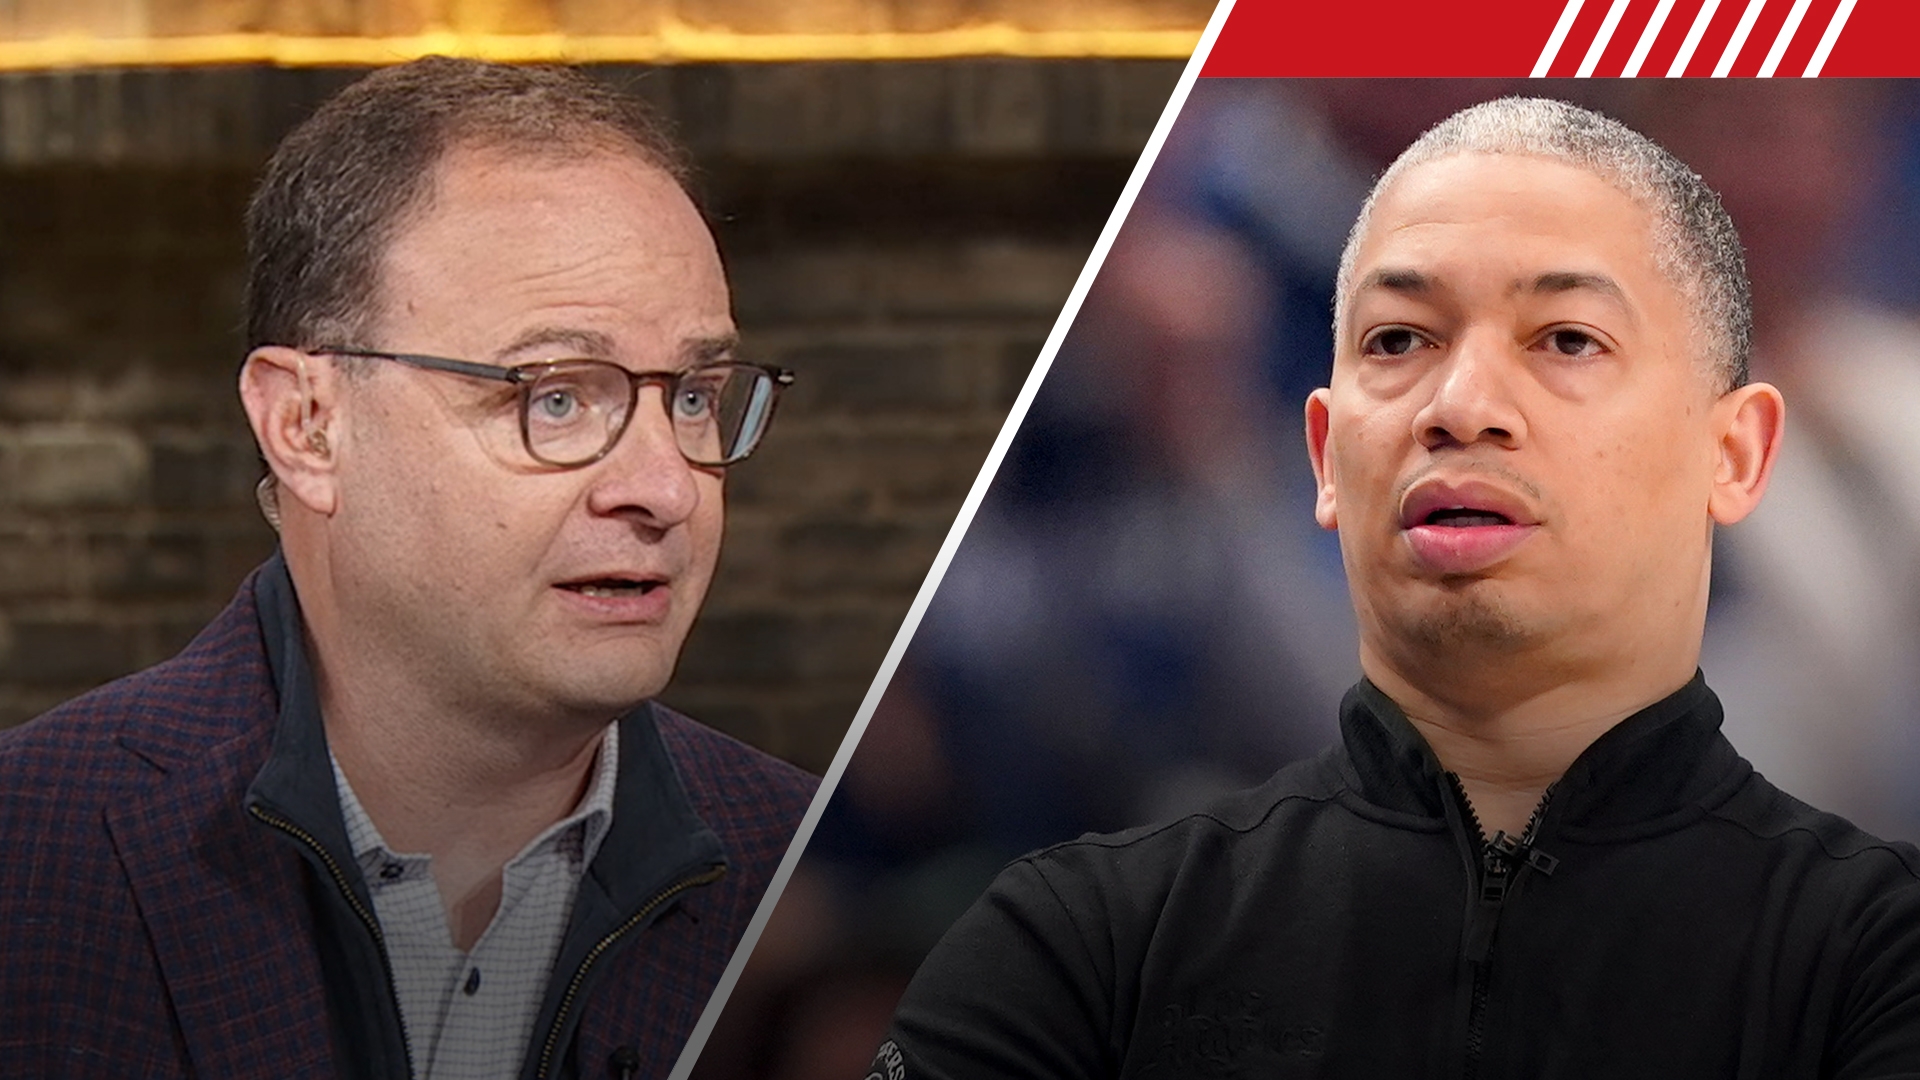 Woj: The Clippers were determined to keep Ty Lue